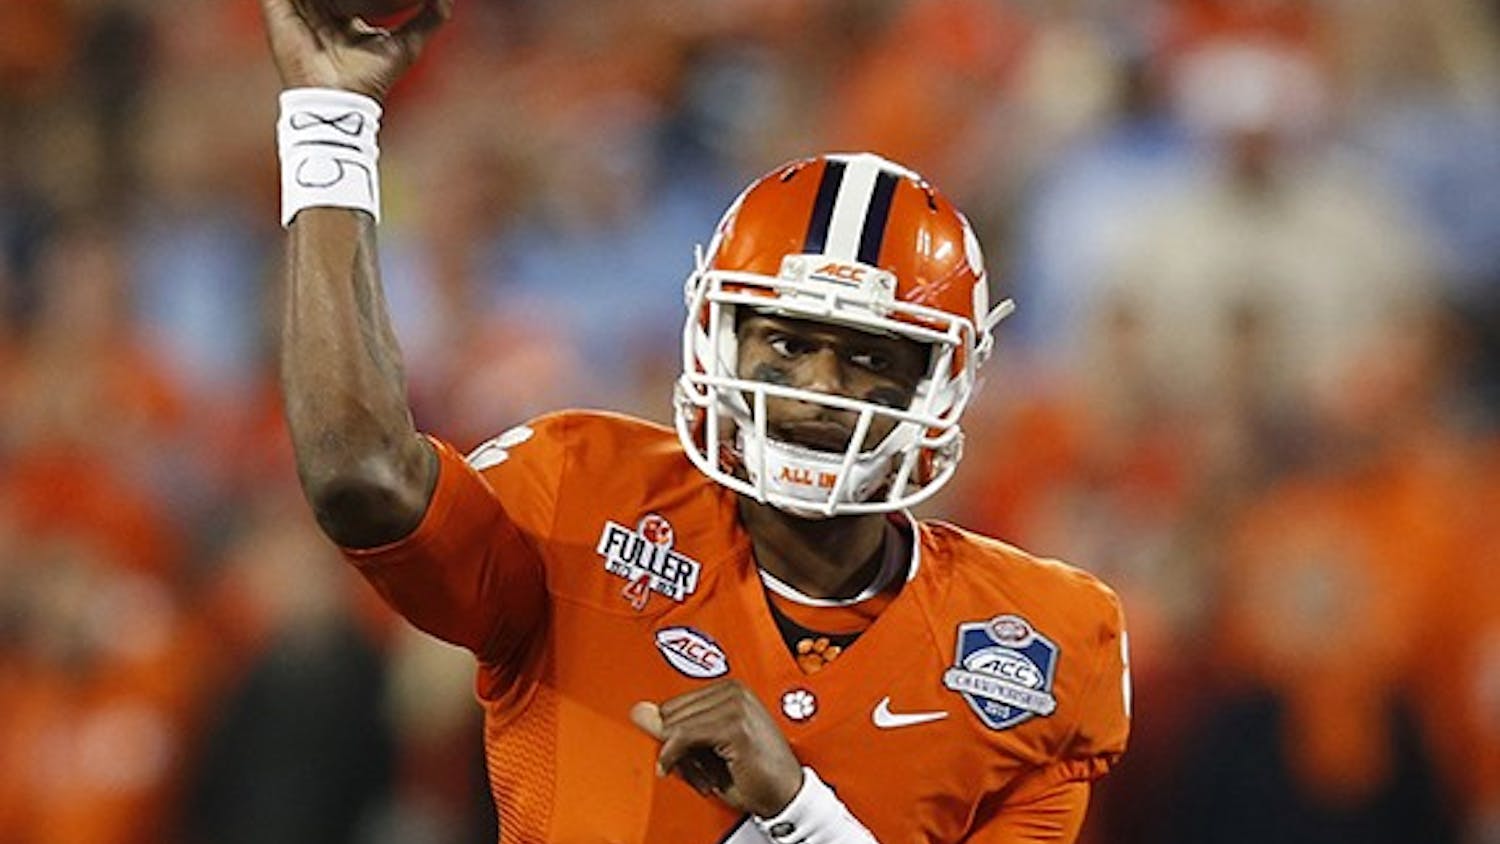 Clemson quarterback Deshaun Watson (4) passes during the first half against North Carolina in the ACC Football Championship at Bank of America Stadium in Charlotte, N.C., on Saturday, Dec. 5, 2015. (Ethan Hyman/Raleigh News &amp; Observer/TNS)